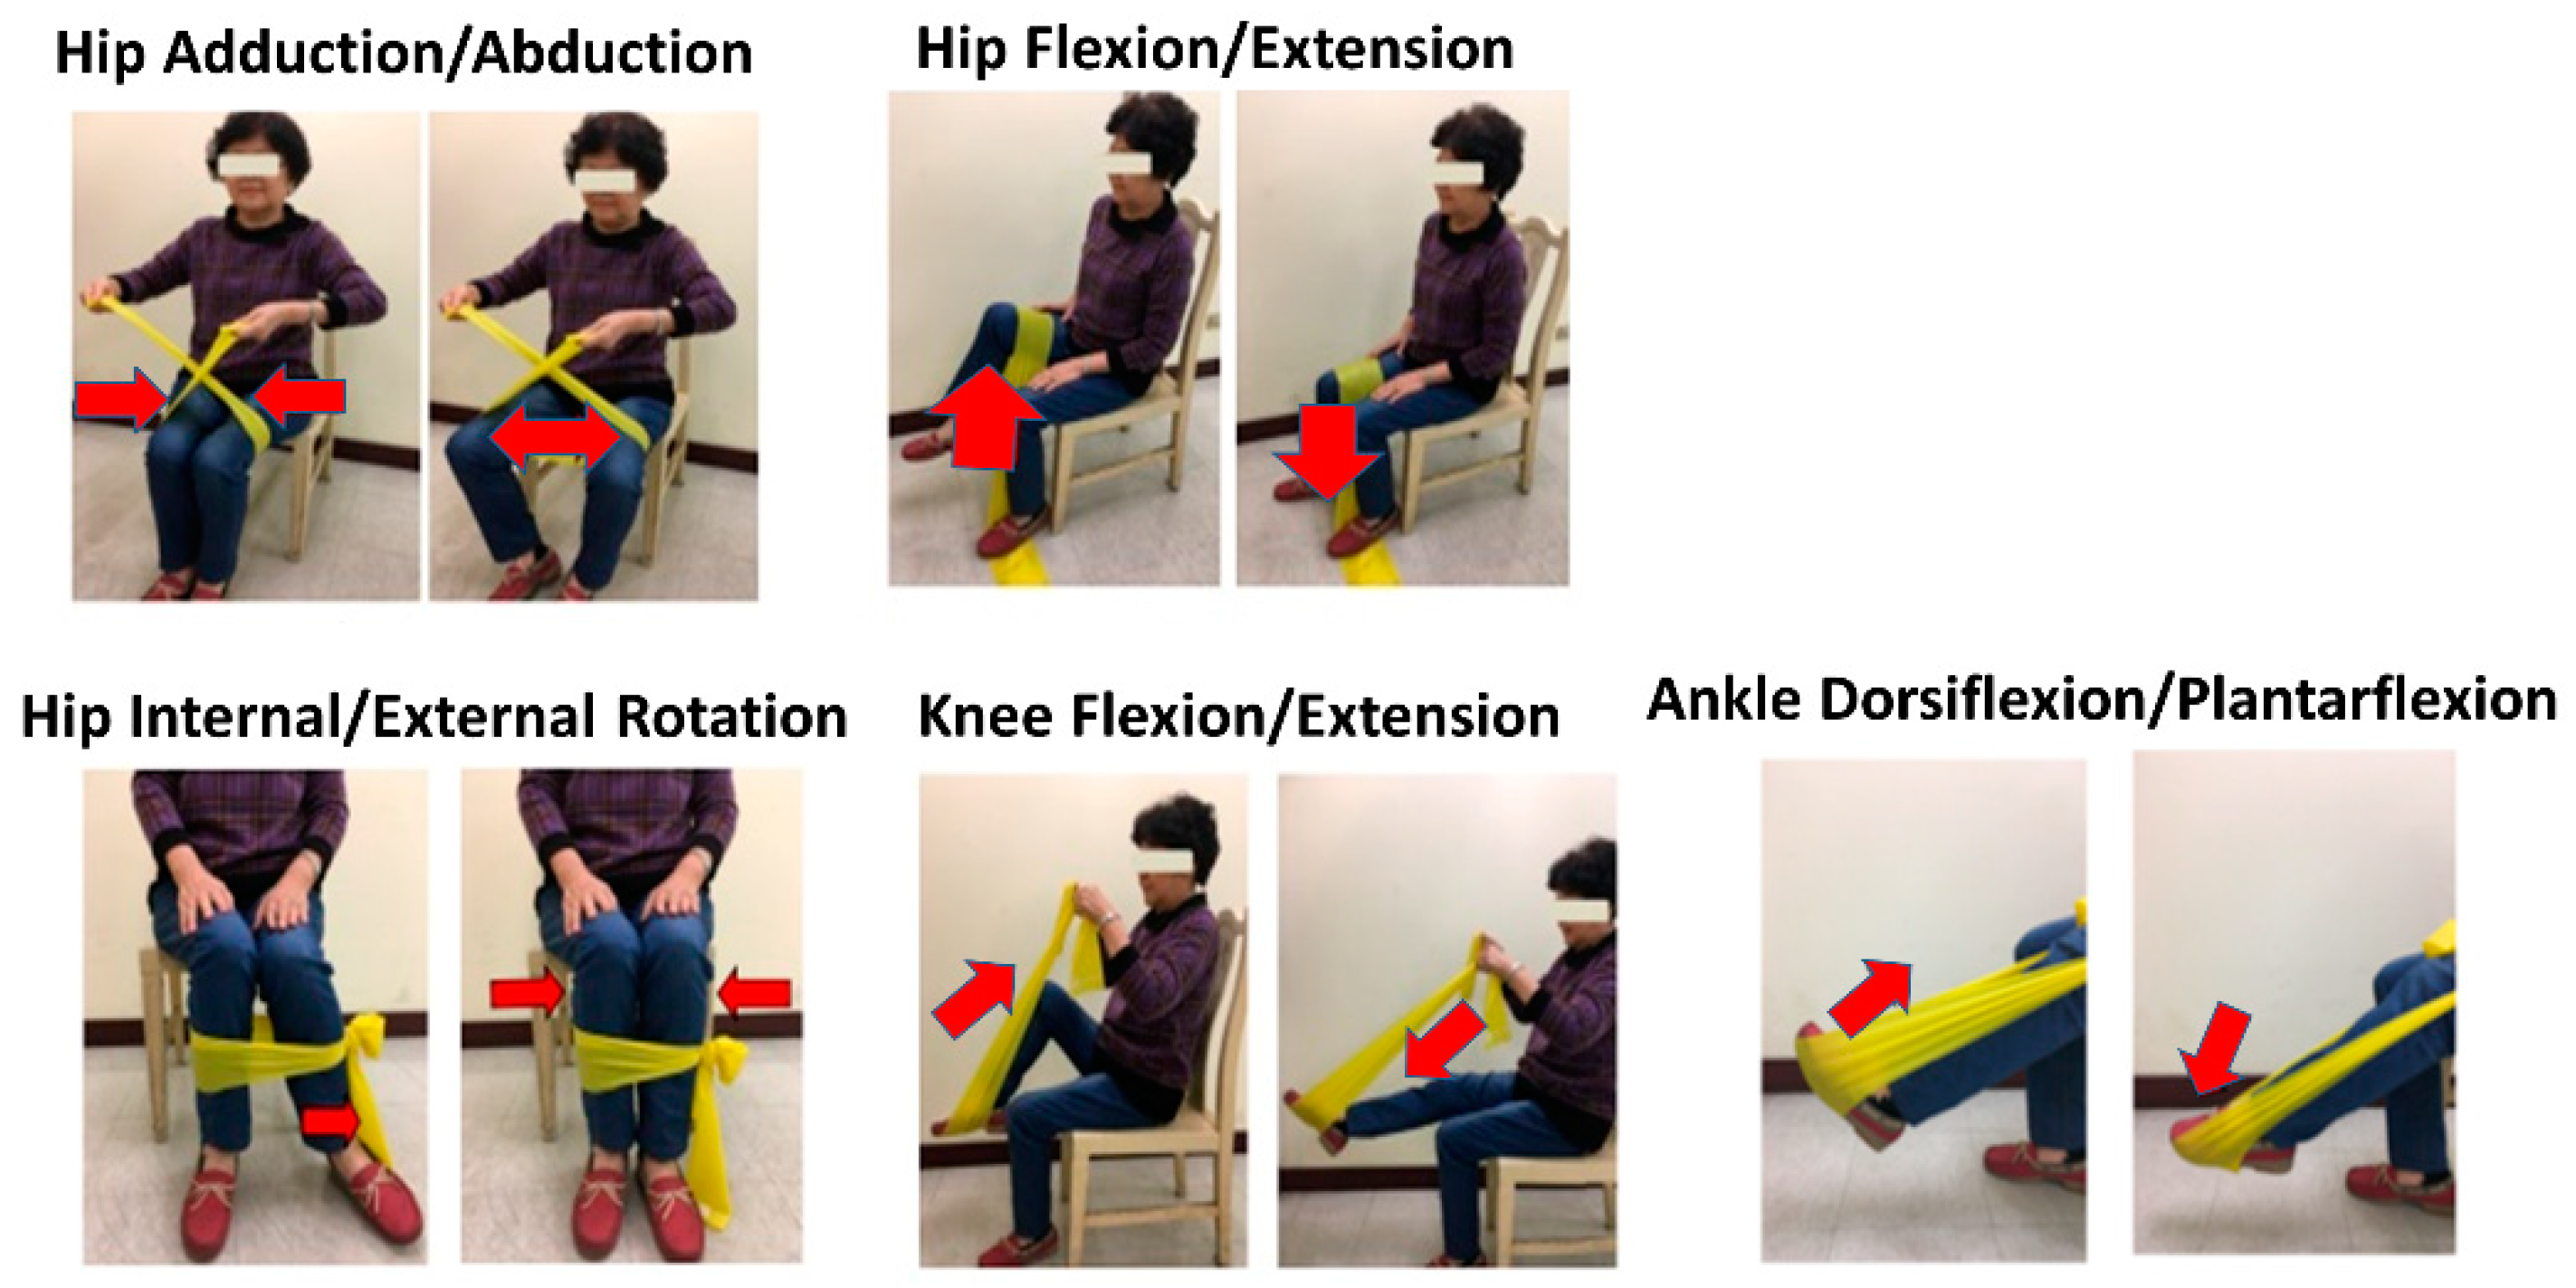 Development and Feasibility of a Senior Elastic Band Exercise